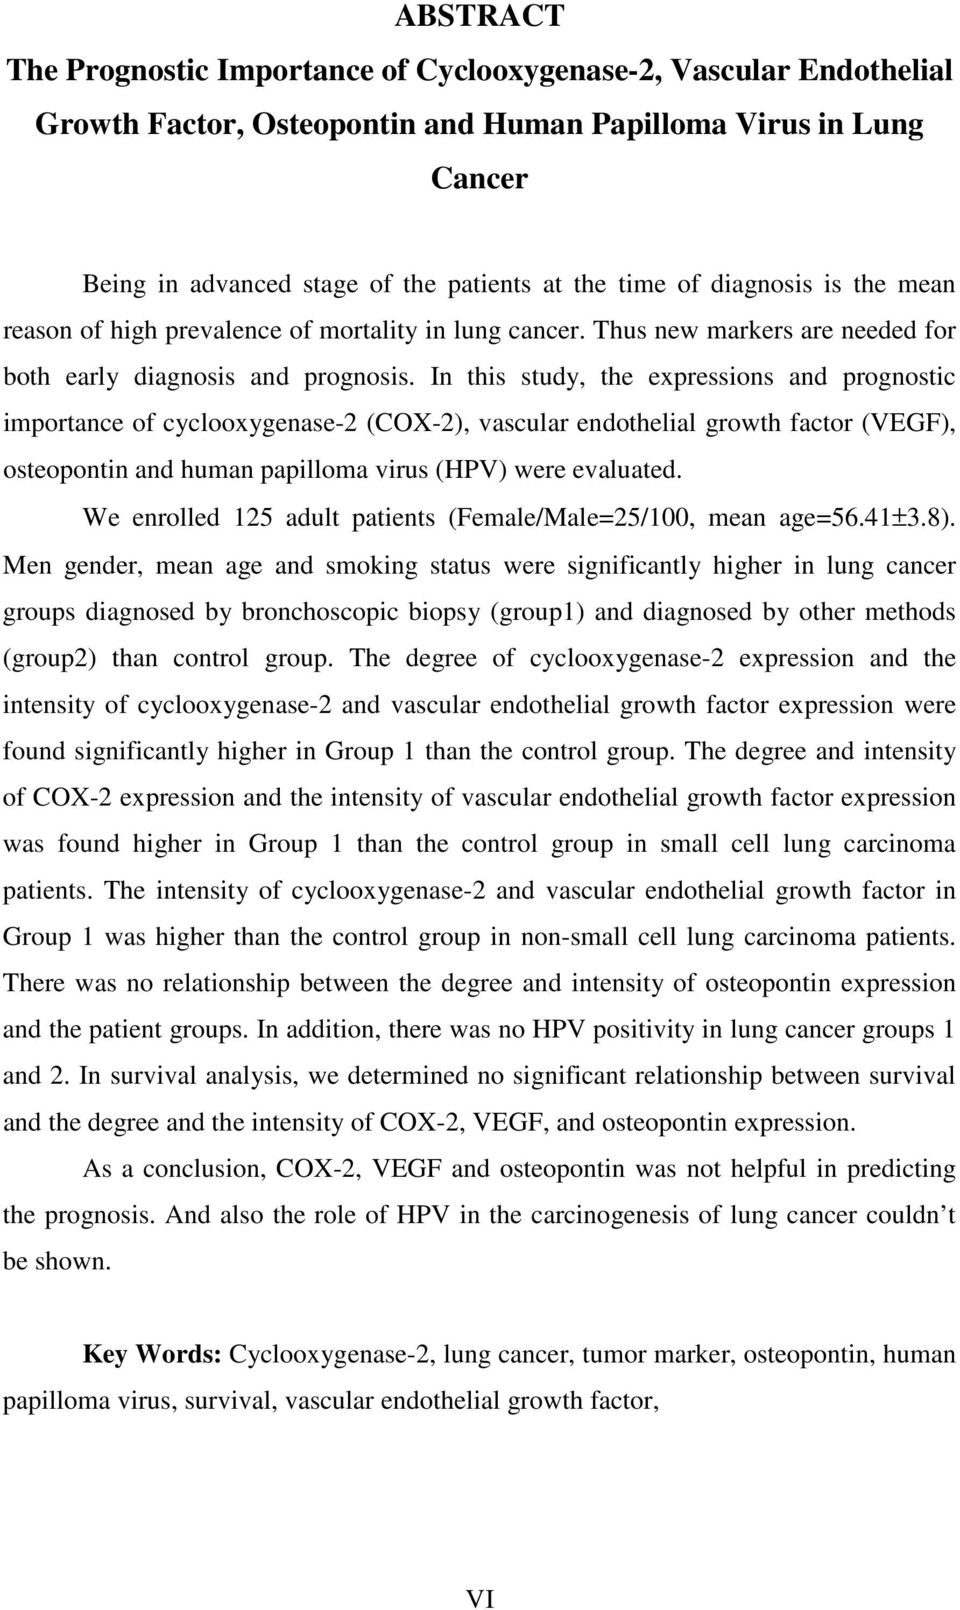 In this study, the expressions and prognostic importance of cyclooxygenase-2 (COX-2), vascular endothelial growth factor (VEGF), osteopontin and human papilloma virus (HPV) were evaluated.